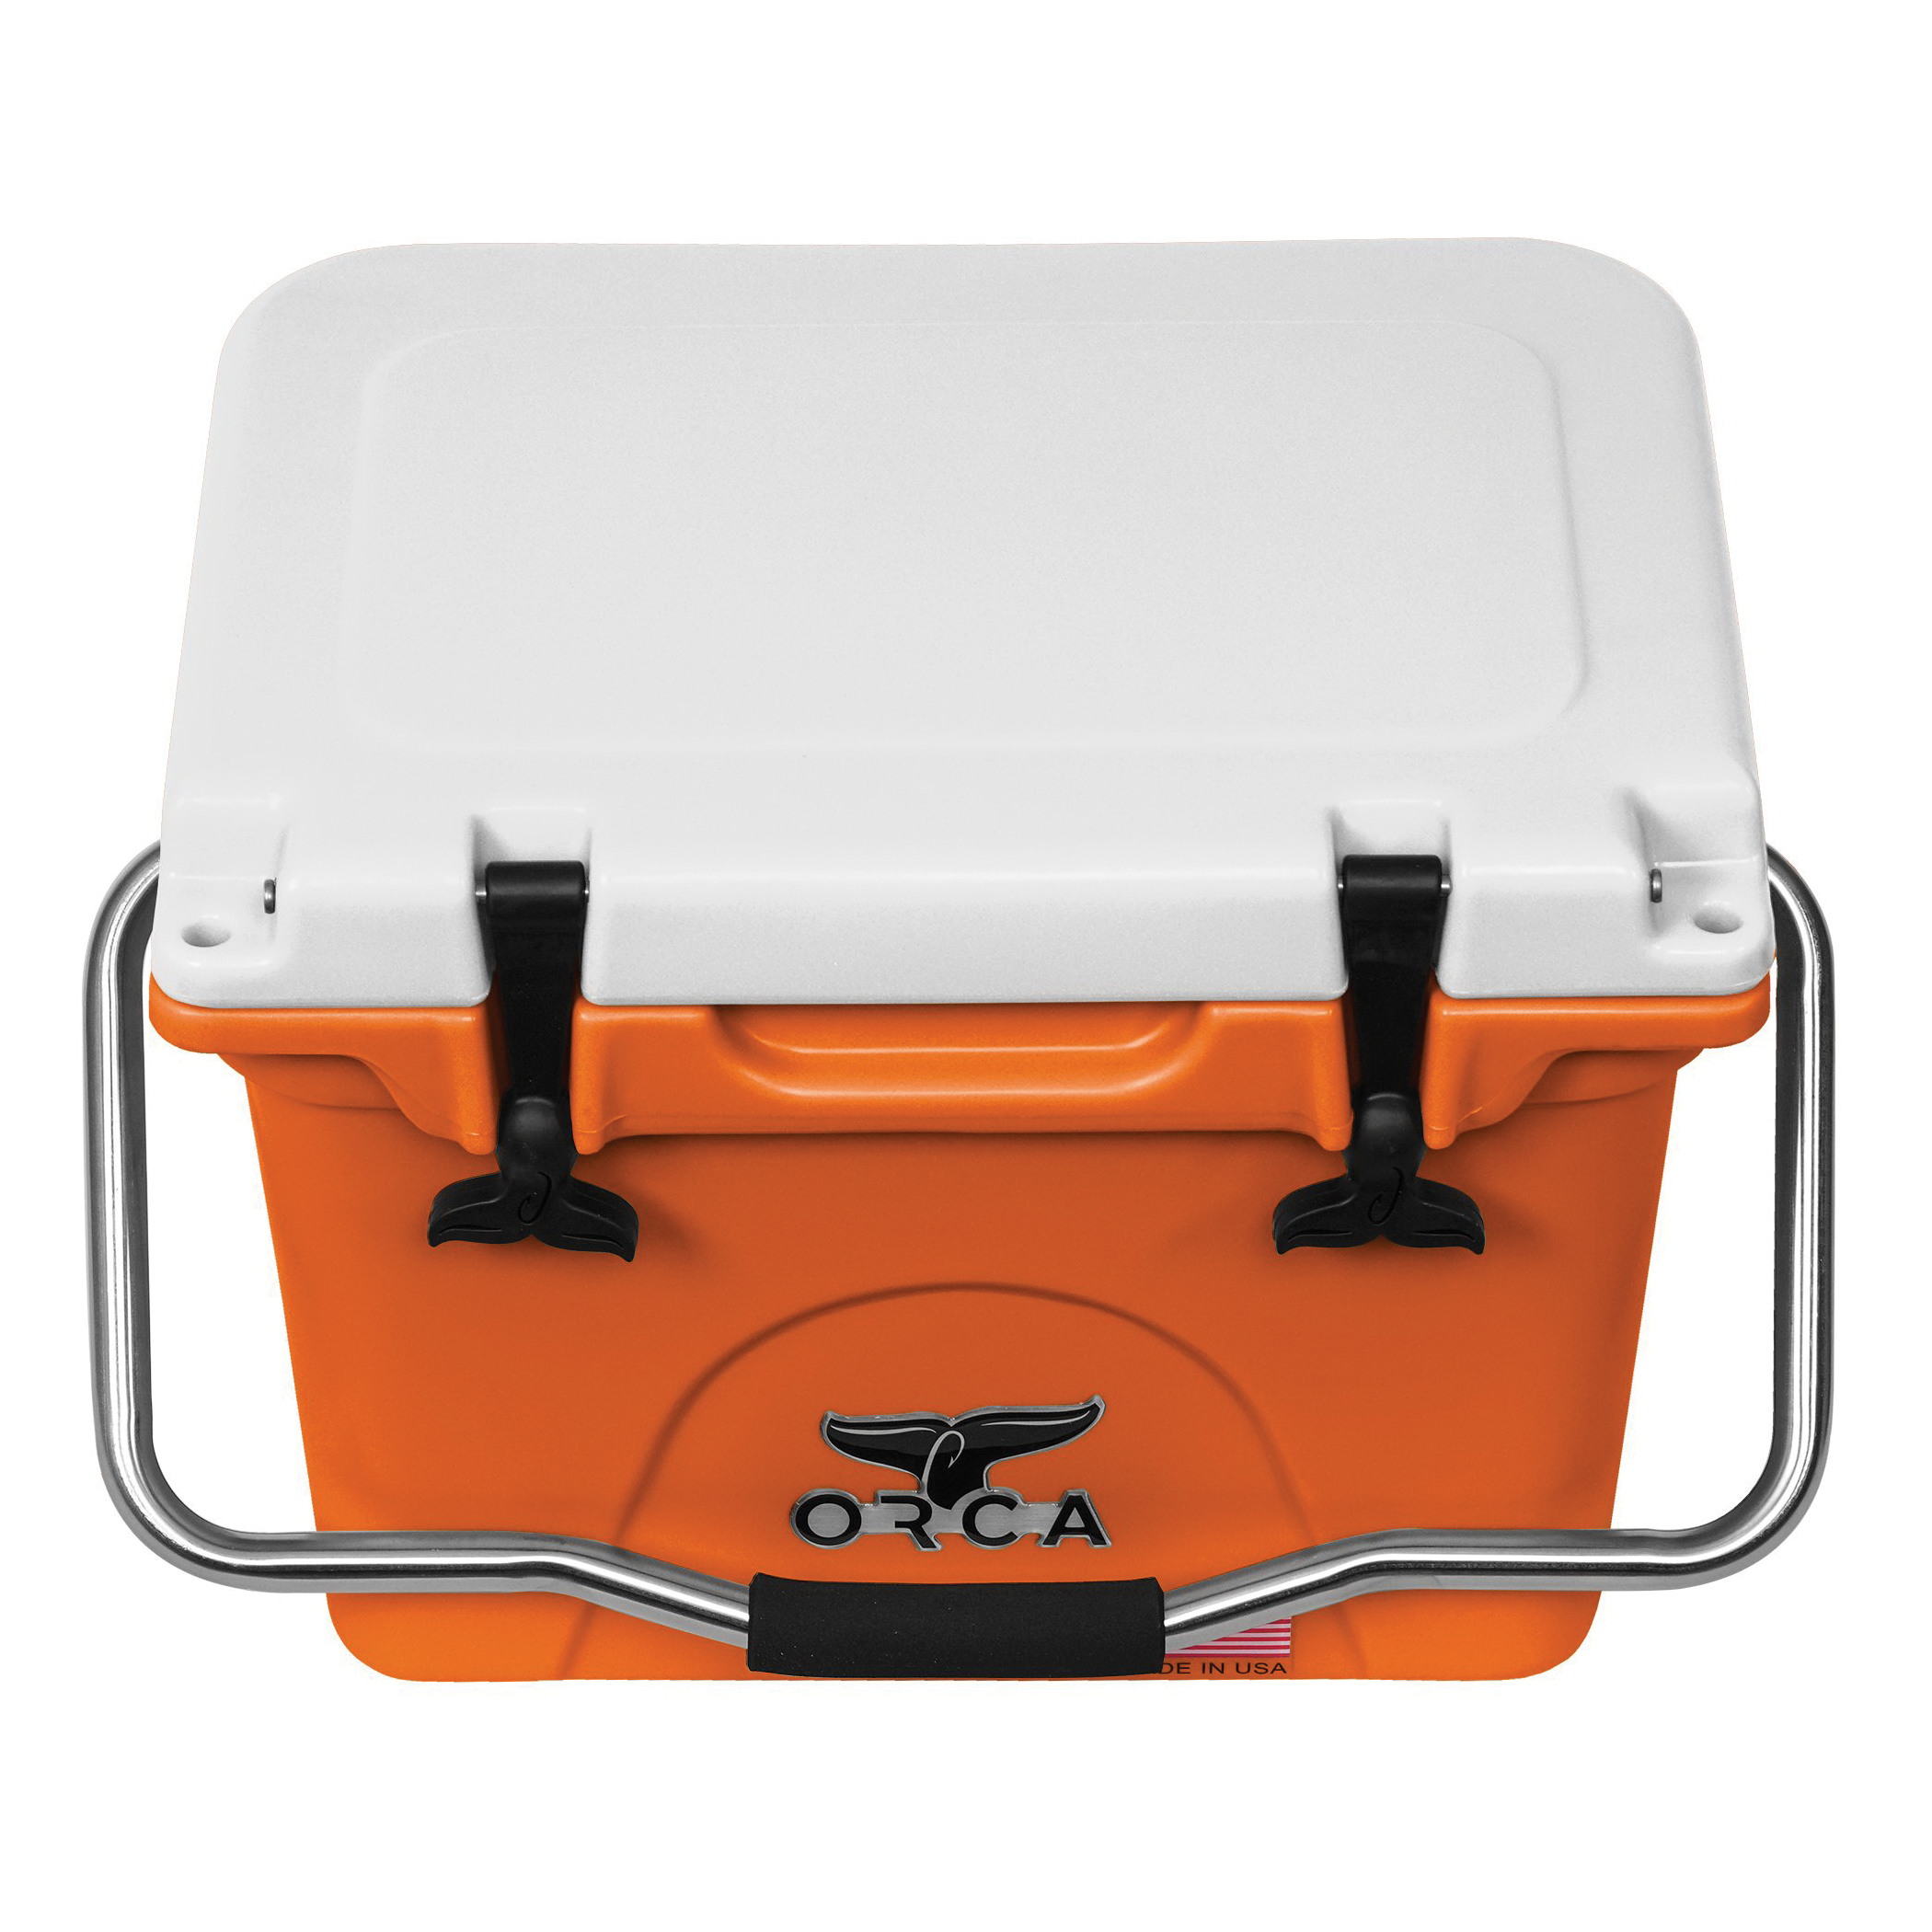 ORCA ORCBO/WH020 Cooler, 20 qt Capacity, Orange/White - 2